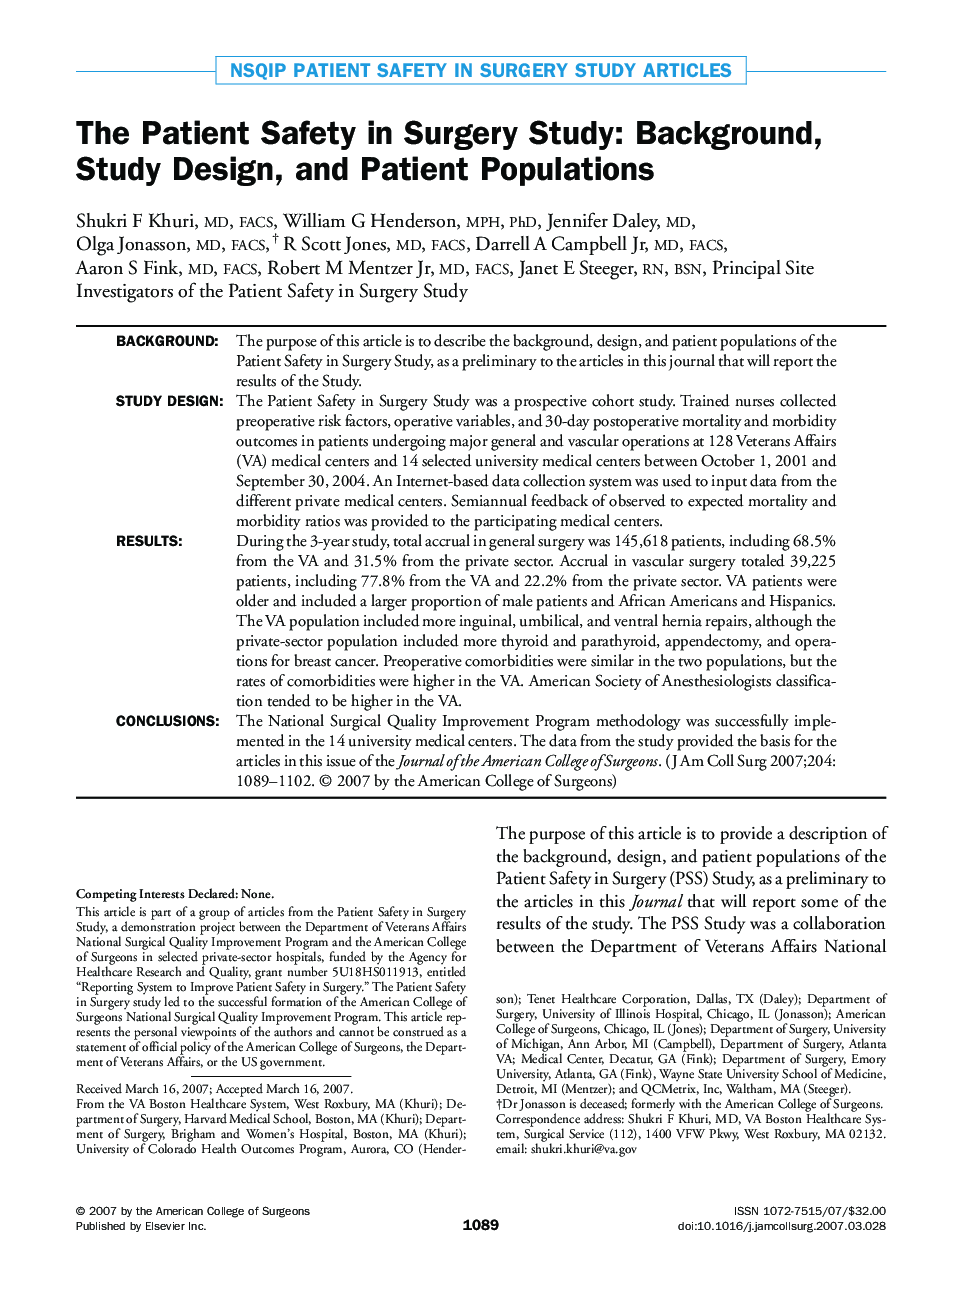 The Patient Safety in Surgery Study: Background, Study Design, and Patient Populations 